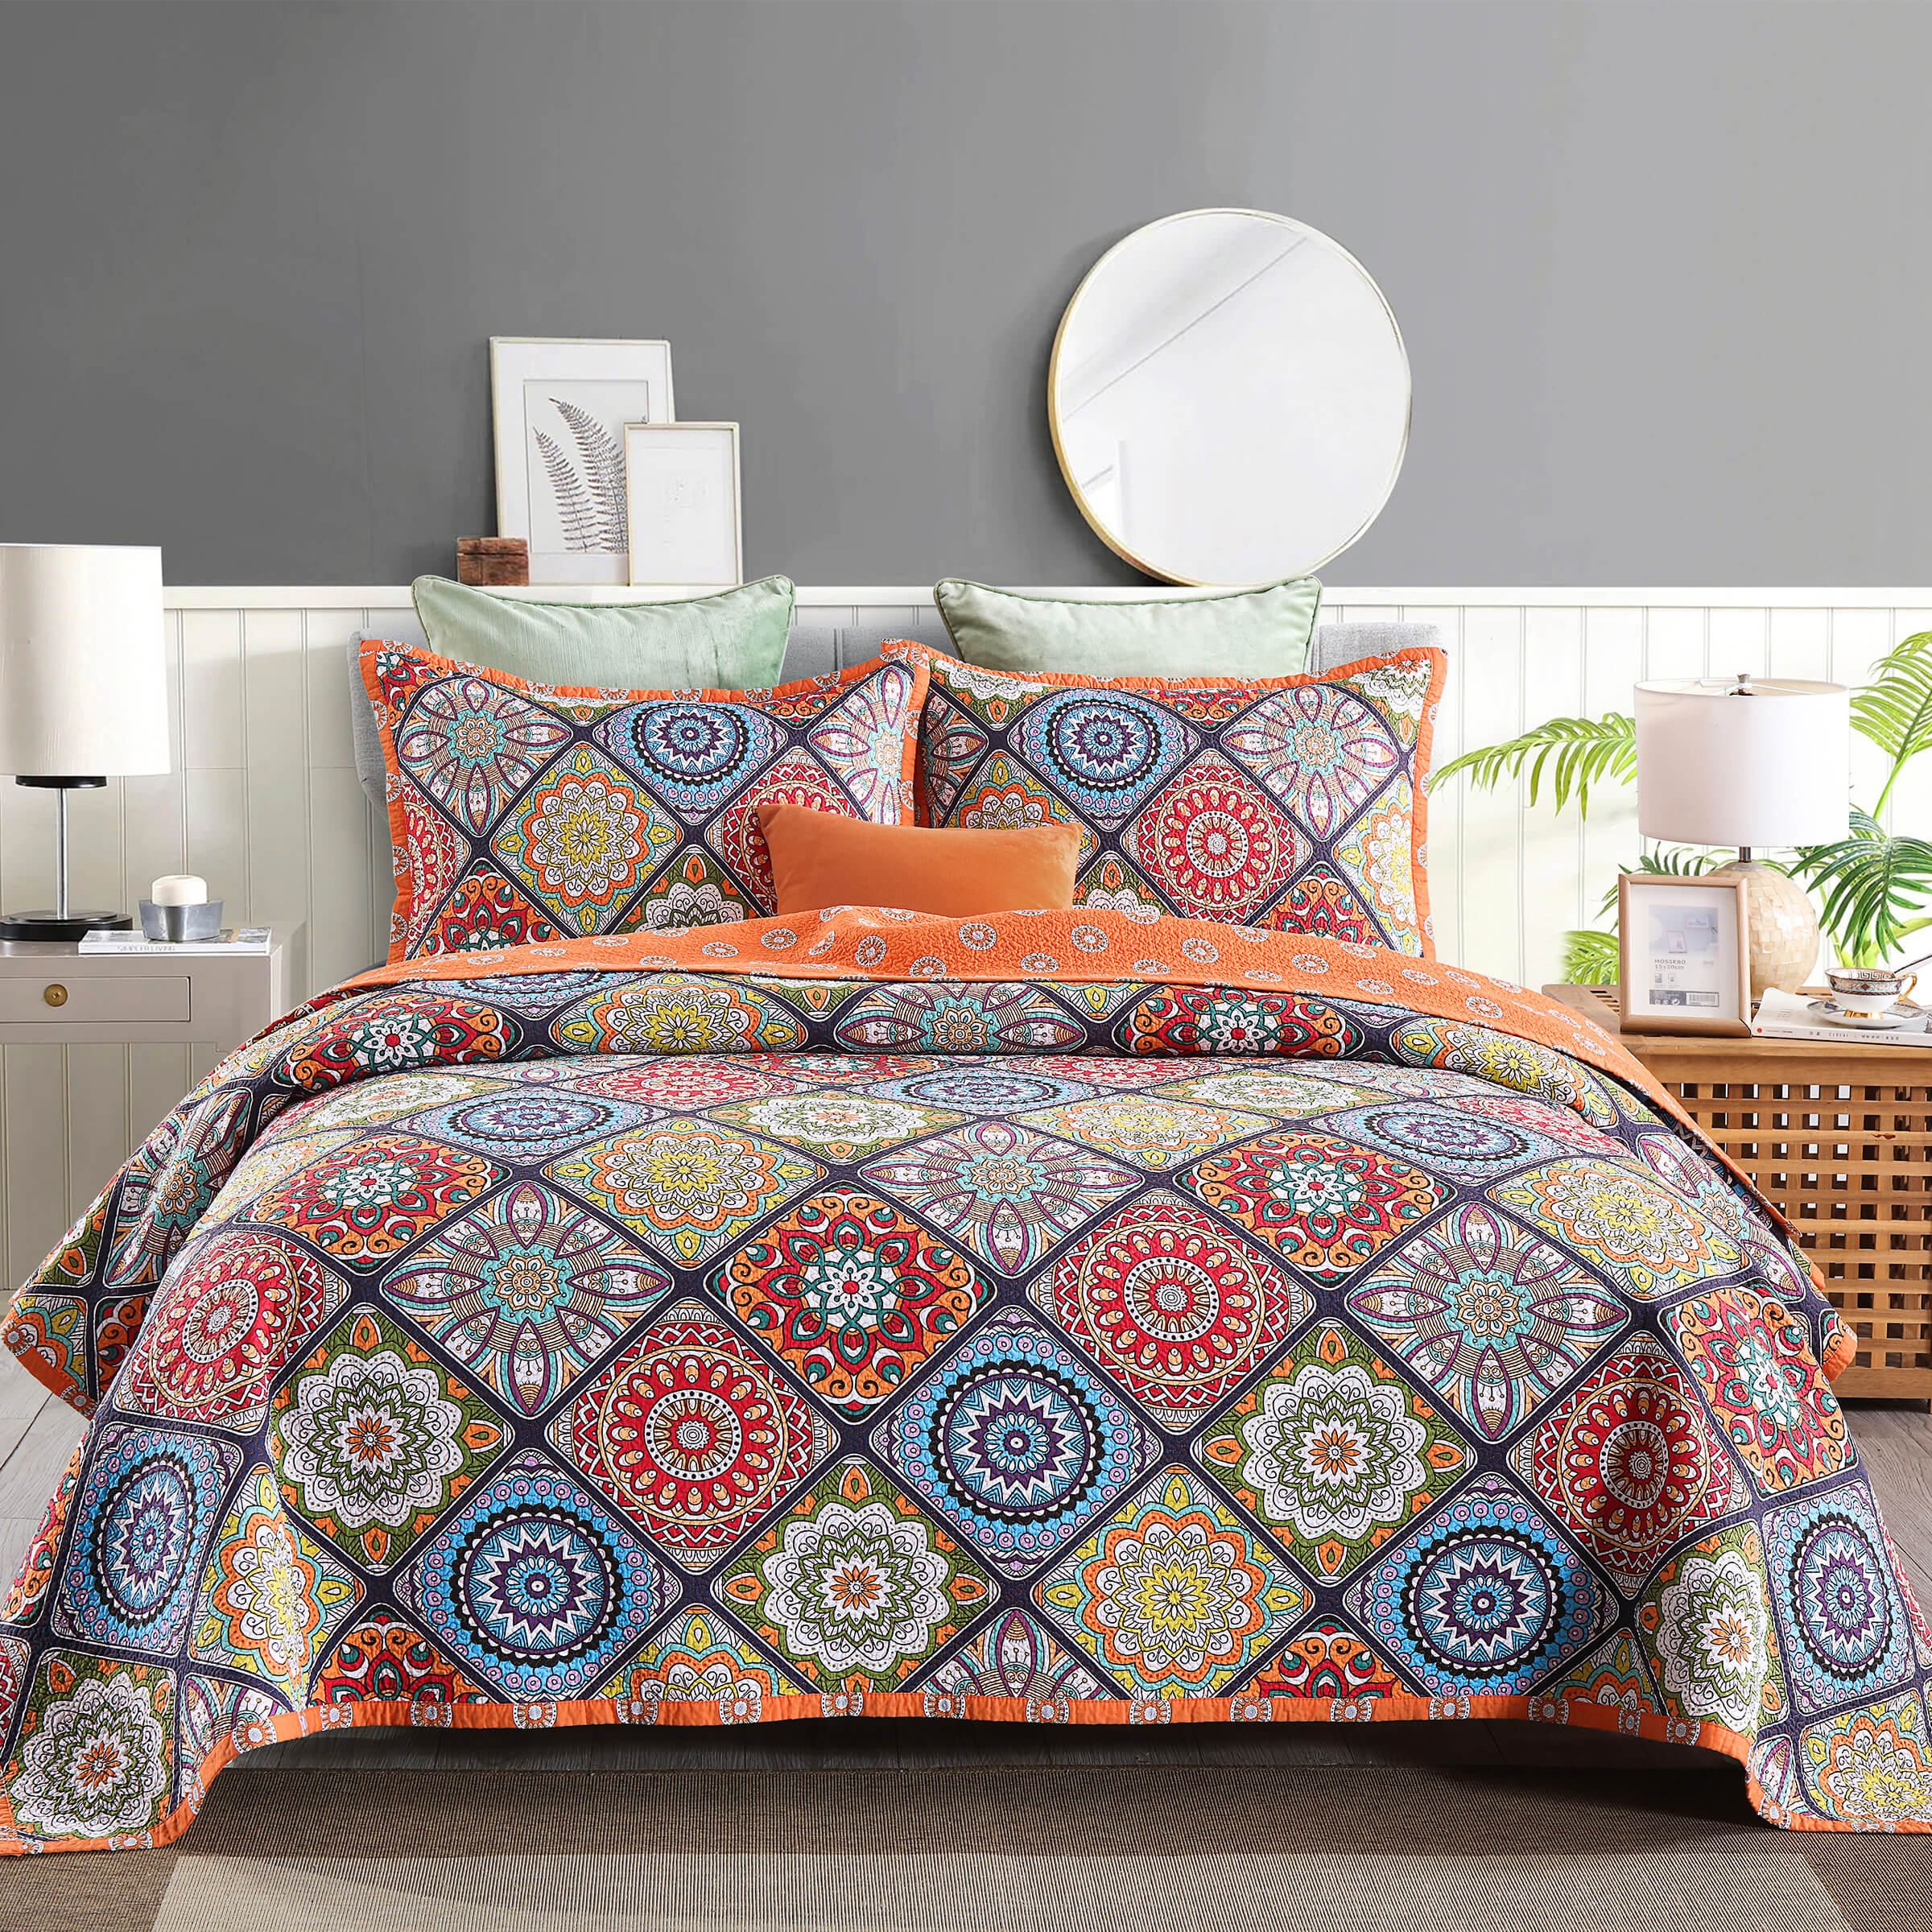 Clearance Exotic Cotton Quilt Set Reversible Bedspread Lightweight for All Season, Queen Size